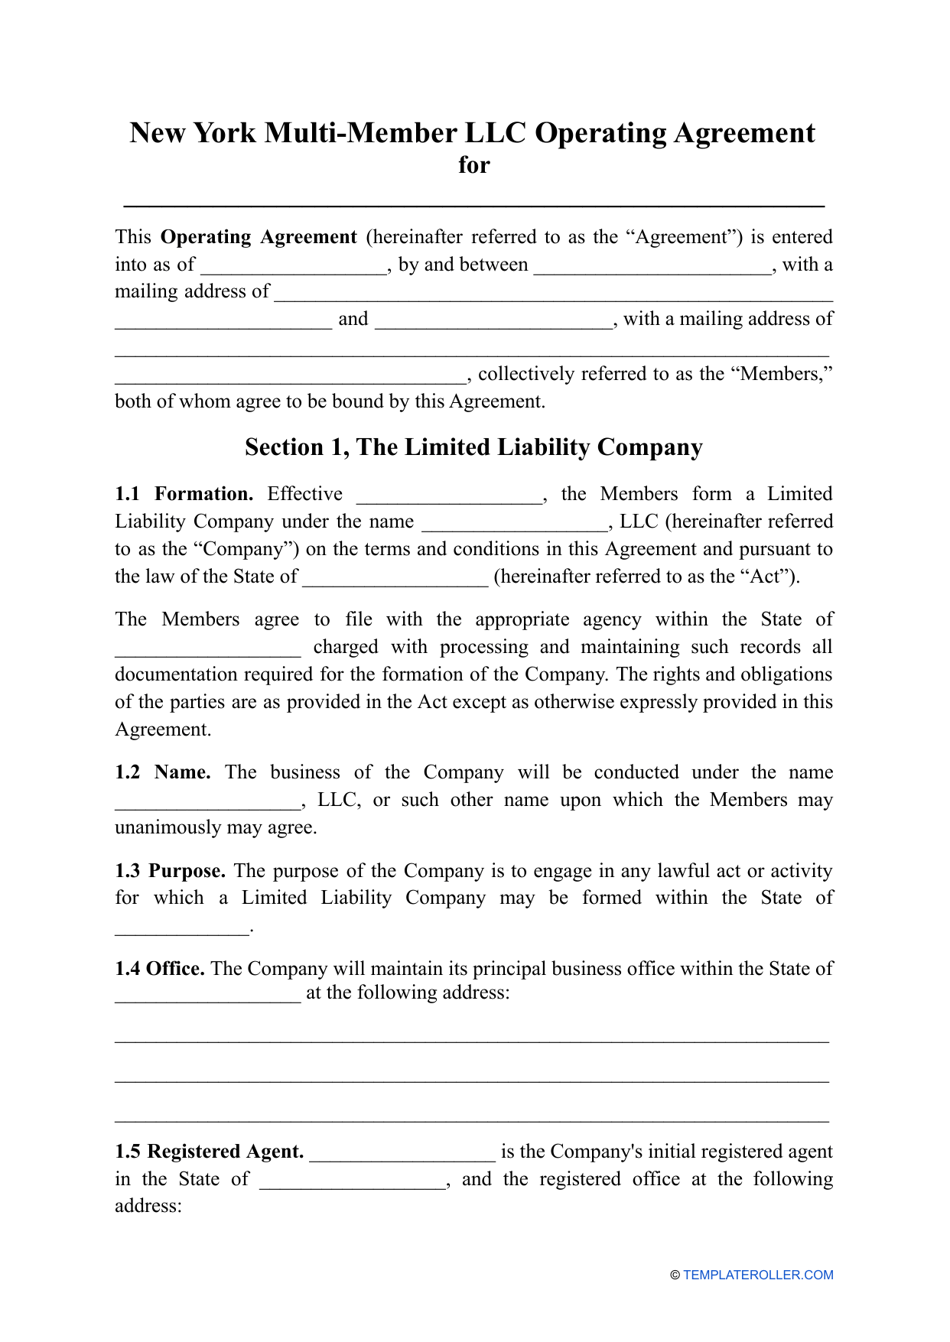 Multi-Member LLC Operating Agreement Template - New York, Page 1